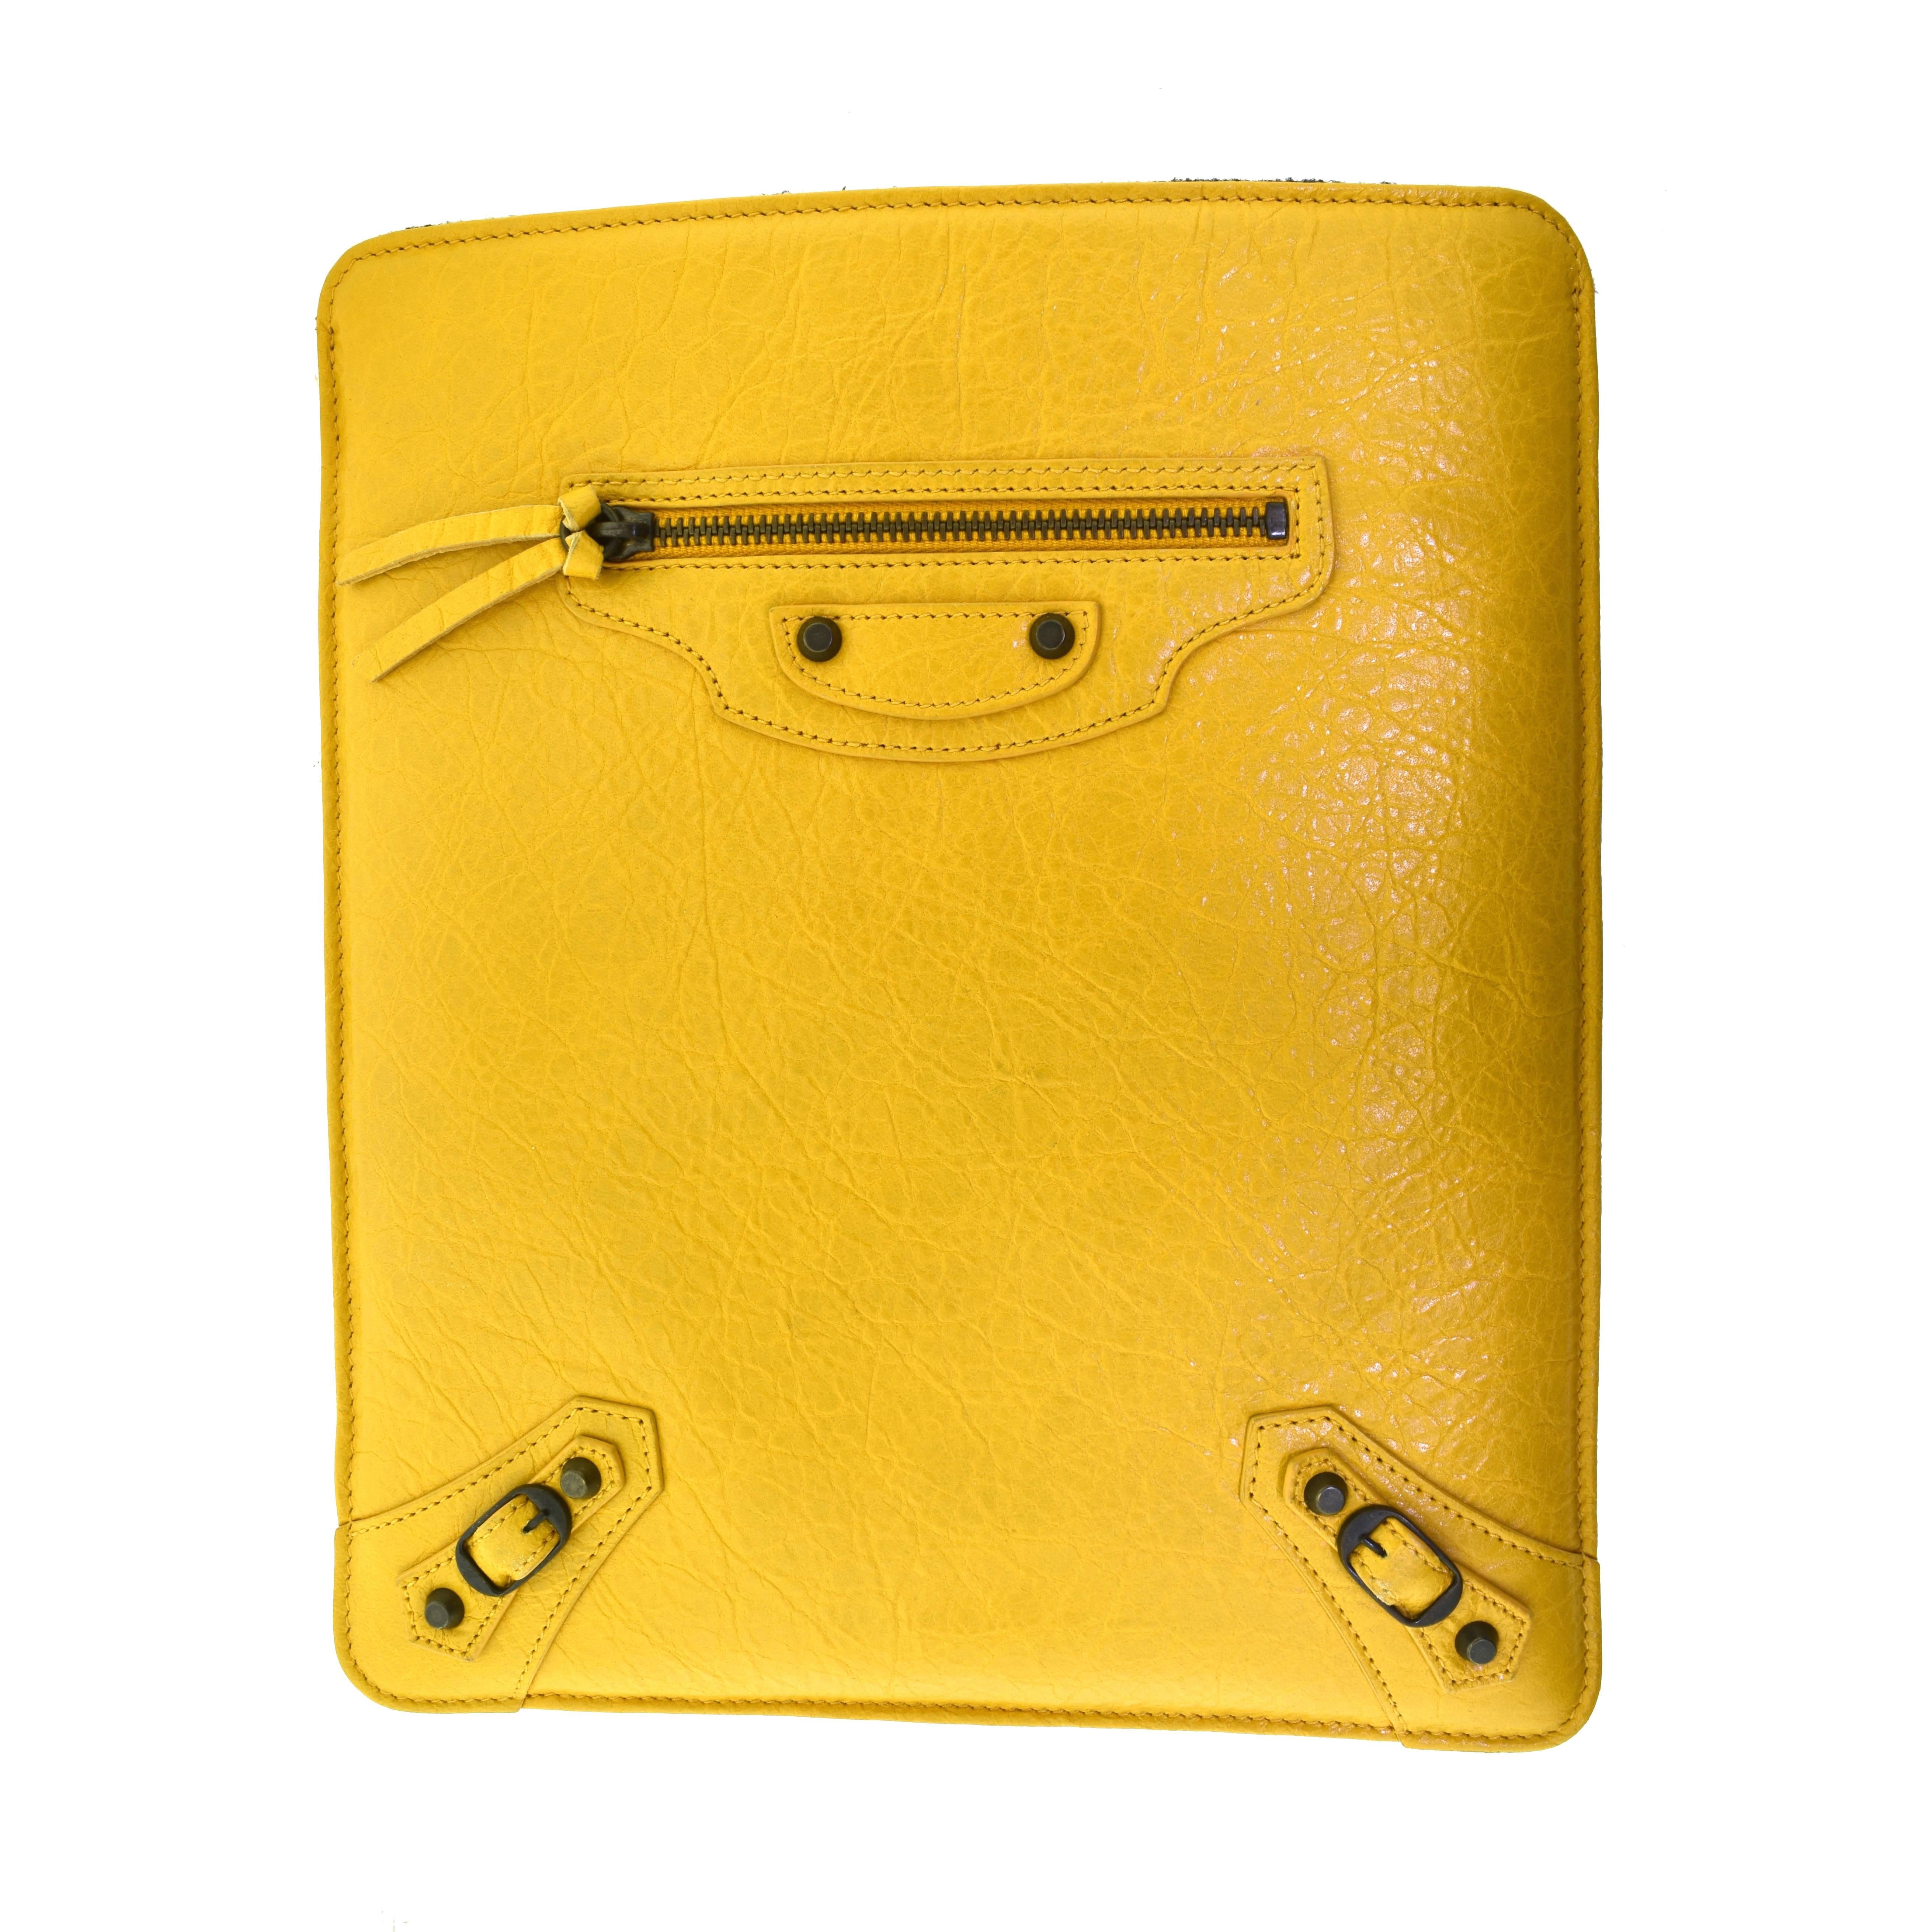 Baliencaga Yellow Leather Ipad Tablet Travel Case For Sale